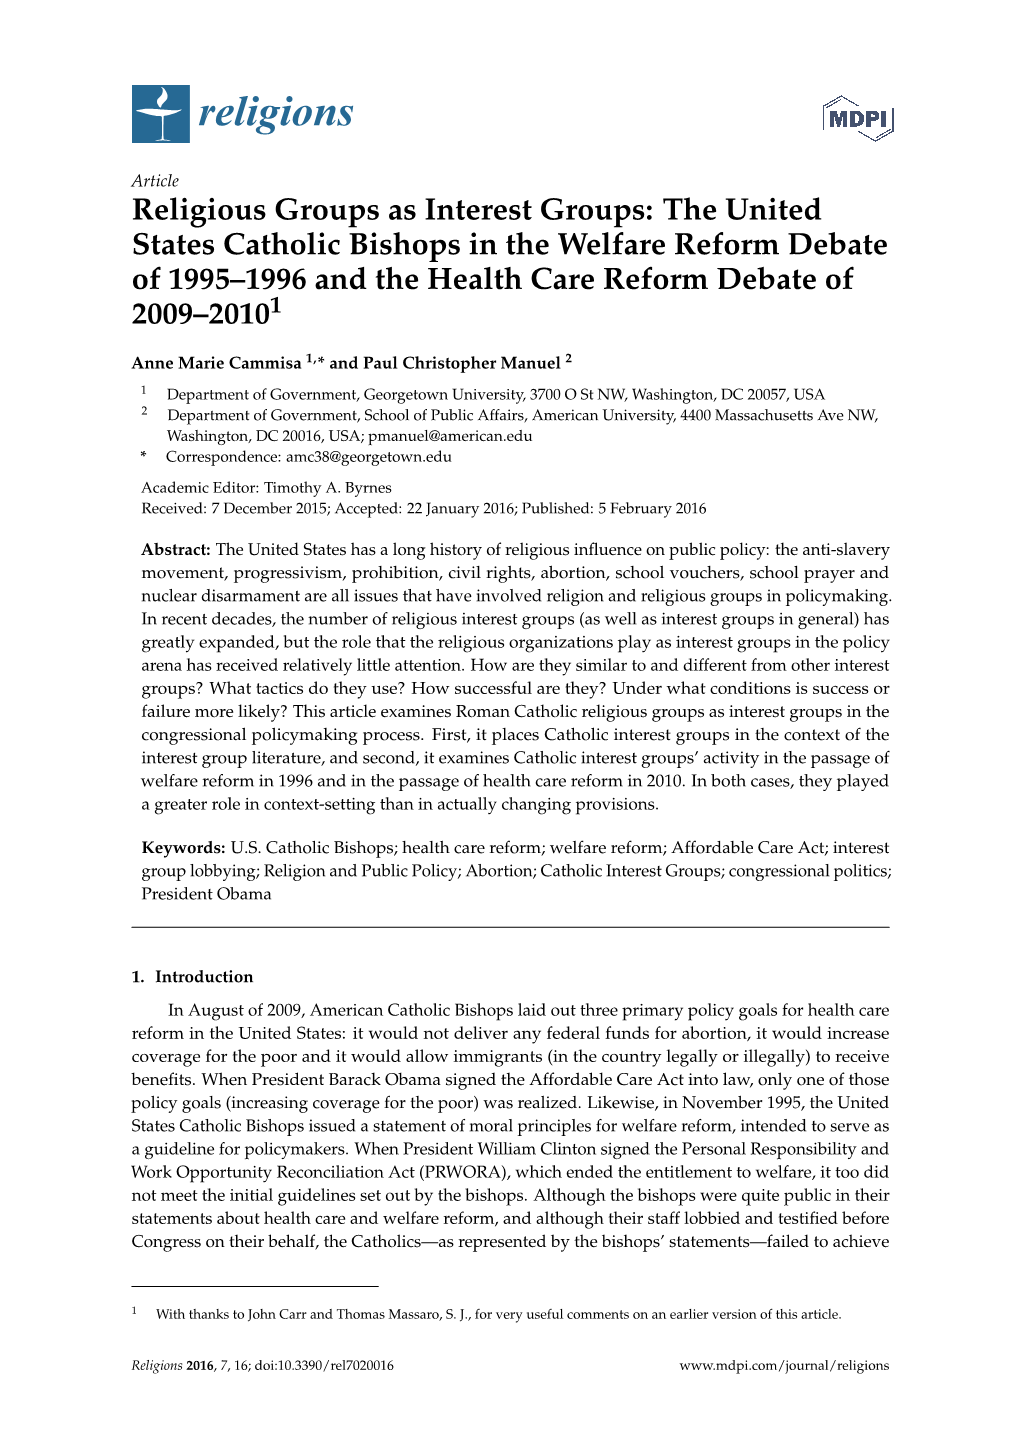 Religious Groups As Interest Groups: the United States Catholic Bishops in the Welfare Reform Debate of 1995–1996 and the Health Care Reform Debate of 2009–20101